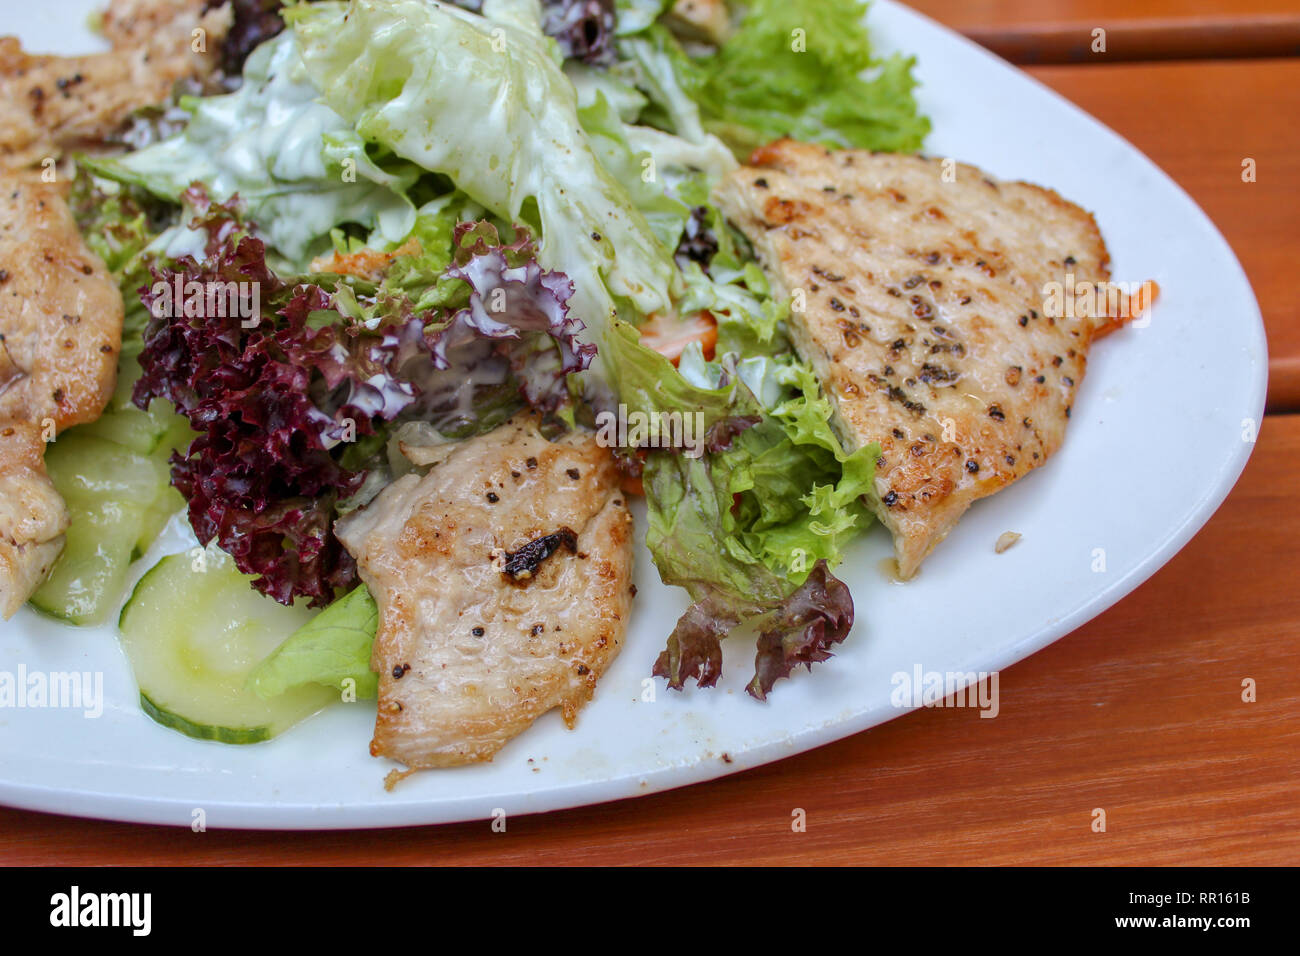 Delicious salad with turkey or chicken stripes and yoghurt dressing closeup Stock Photo